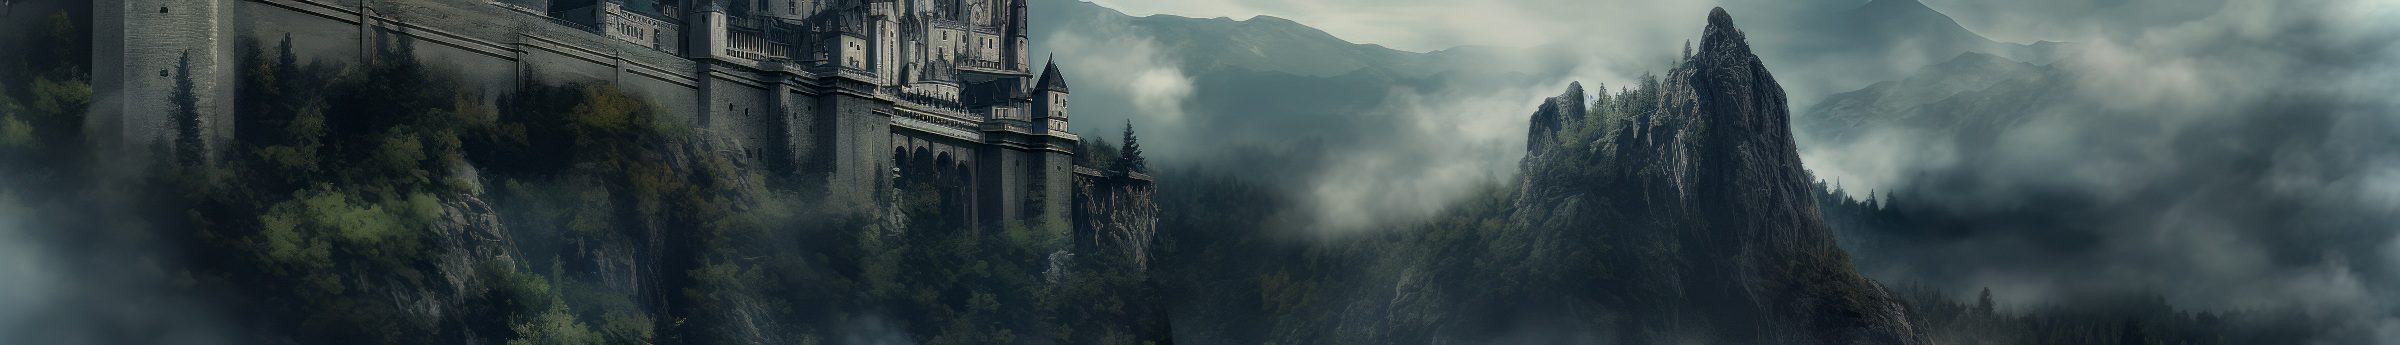 Dark Academia Castle Architecture in an Ominous Medieval Gothic setting with clouds and mountains image